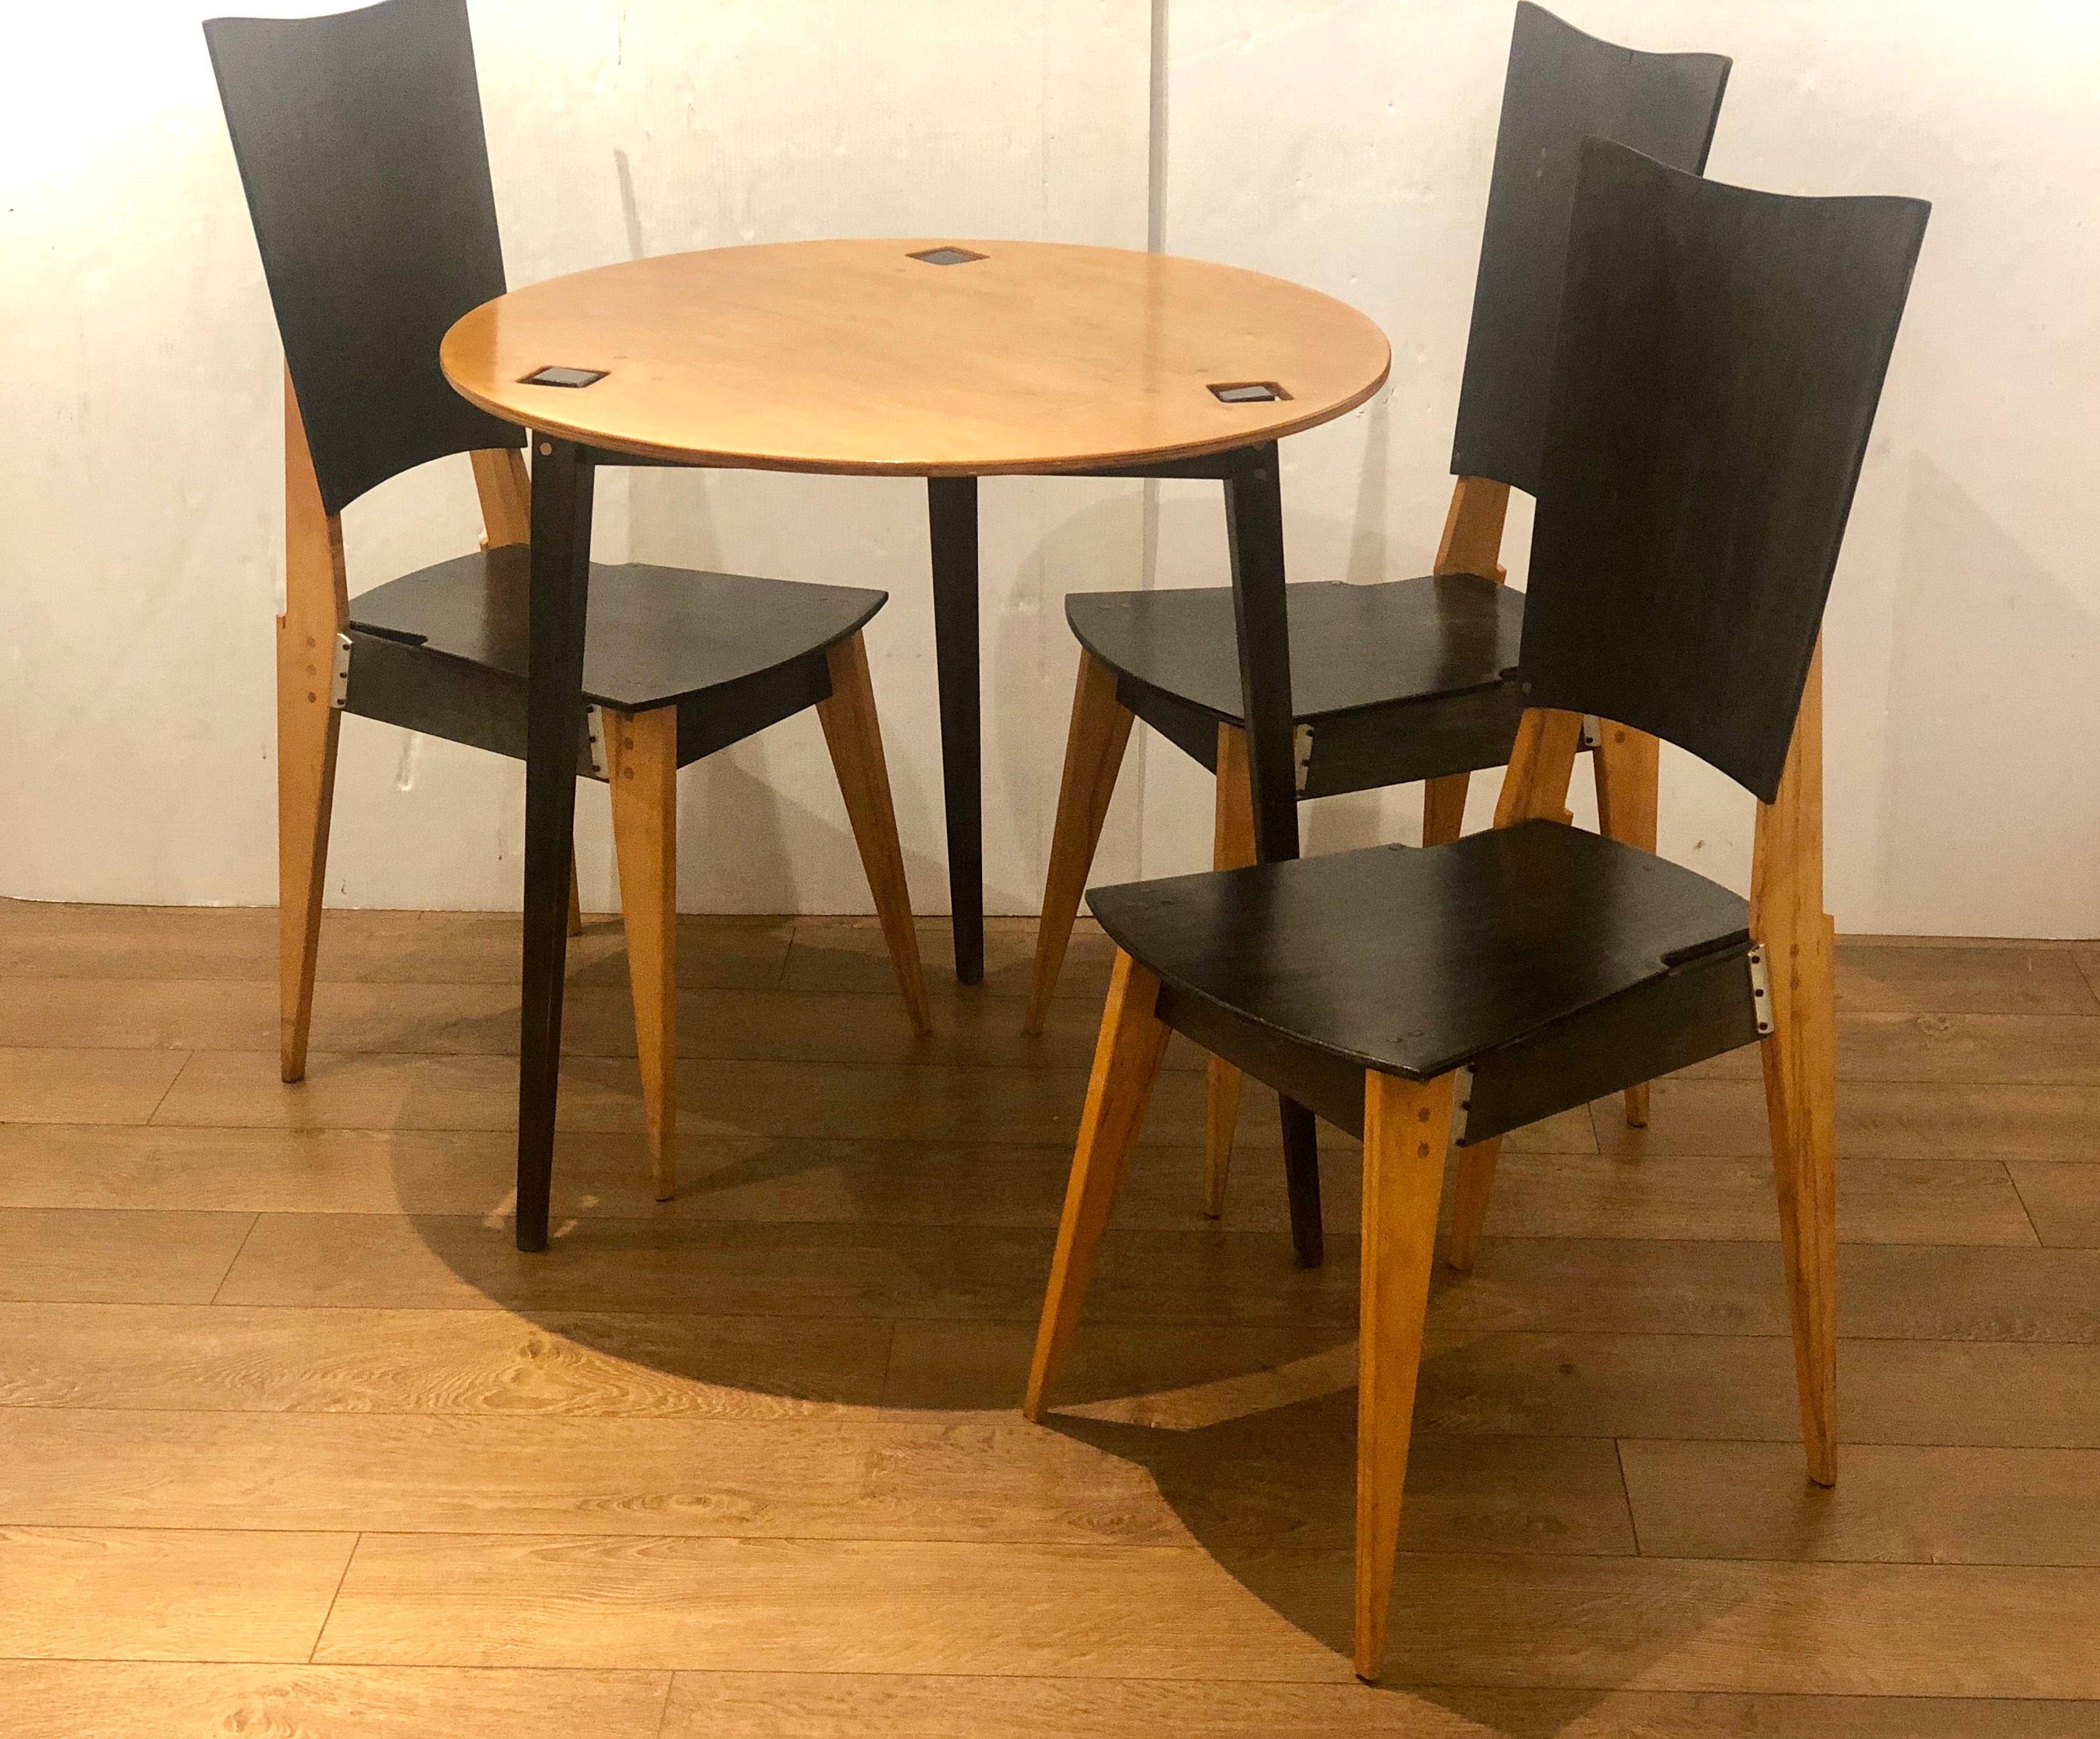 Plywood Postmoden Rare Dinette Set by Randy Castellan for Makea Studio Signed For Sale